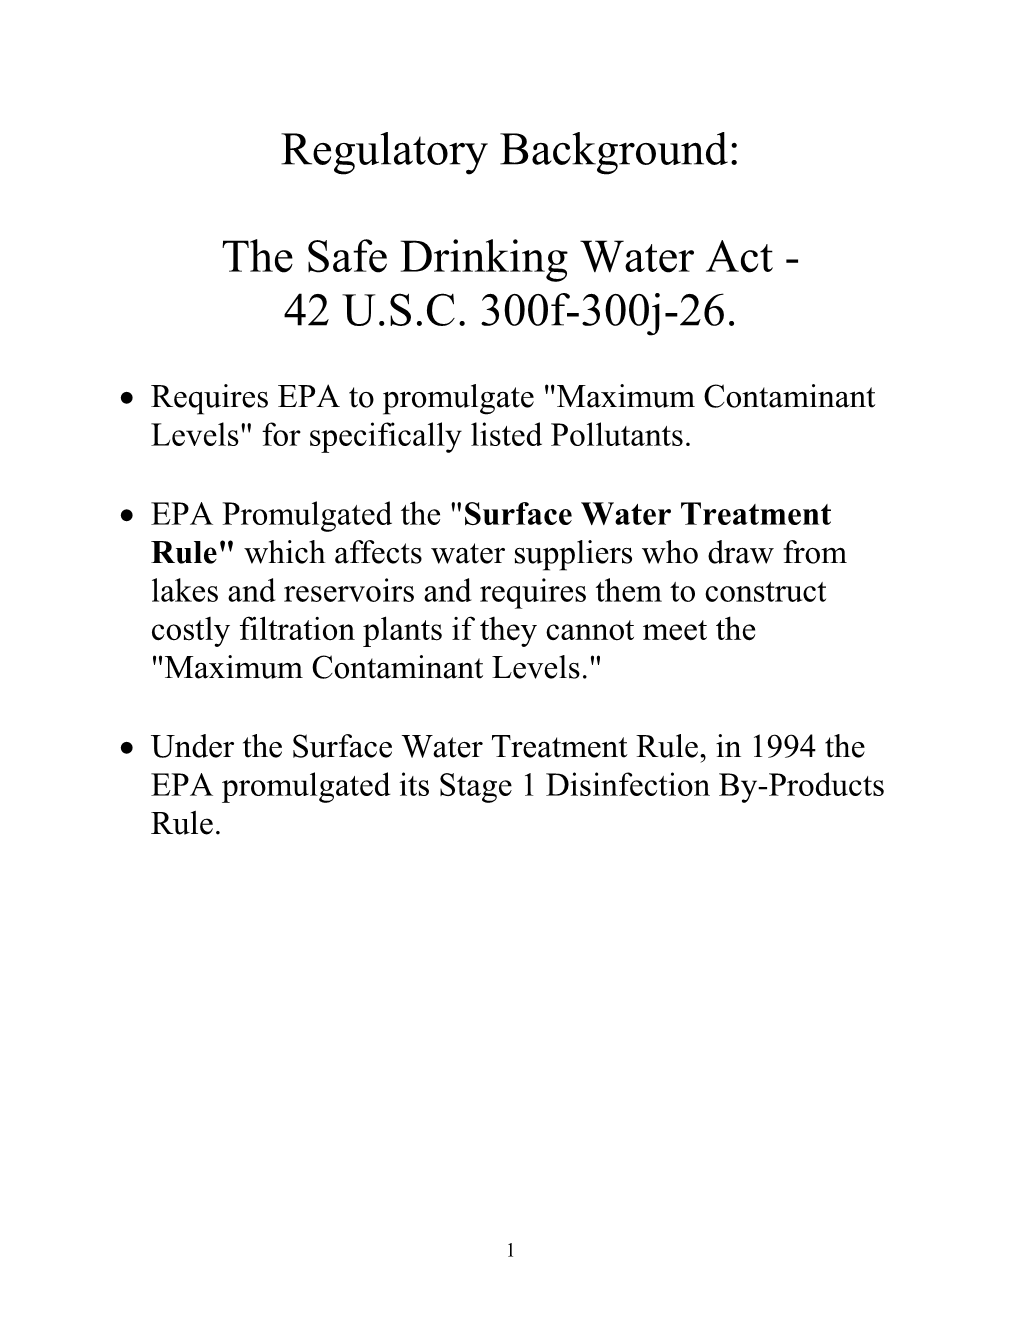 The Safe Drinking Water Act